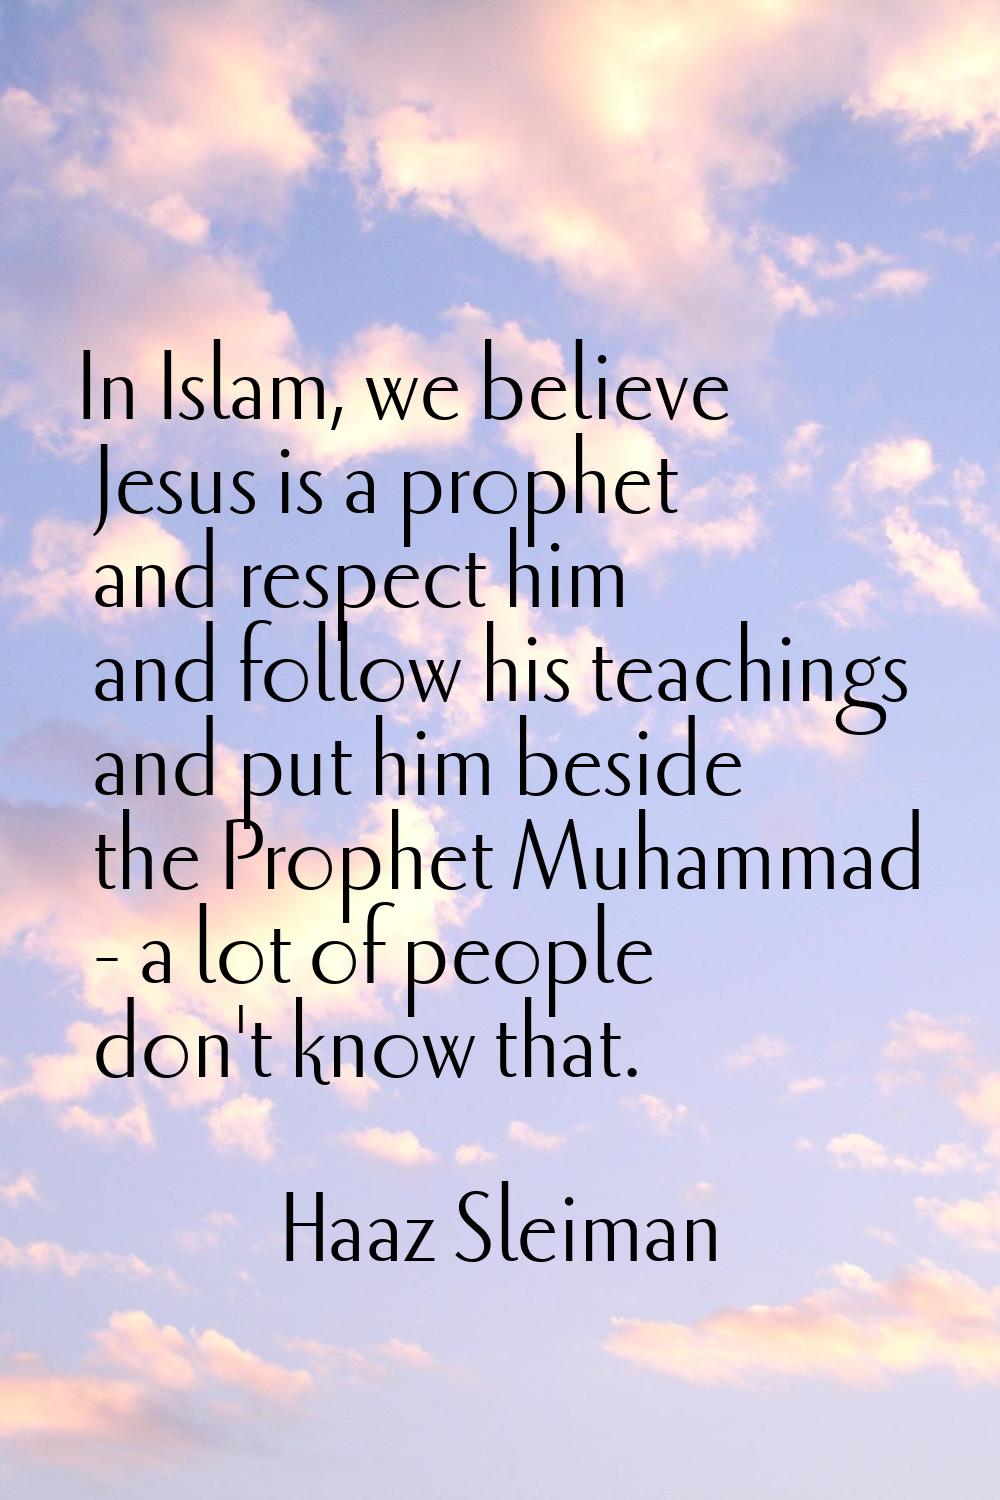 In Islam, we believe Jesus is a prophet and respect him and follow his teachings and put him beside